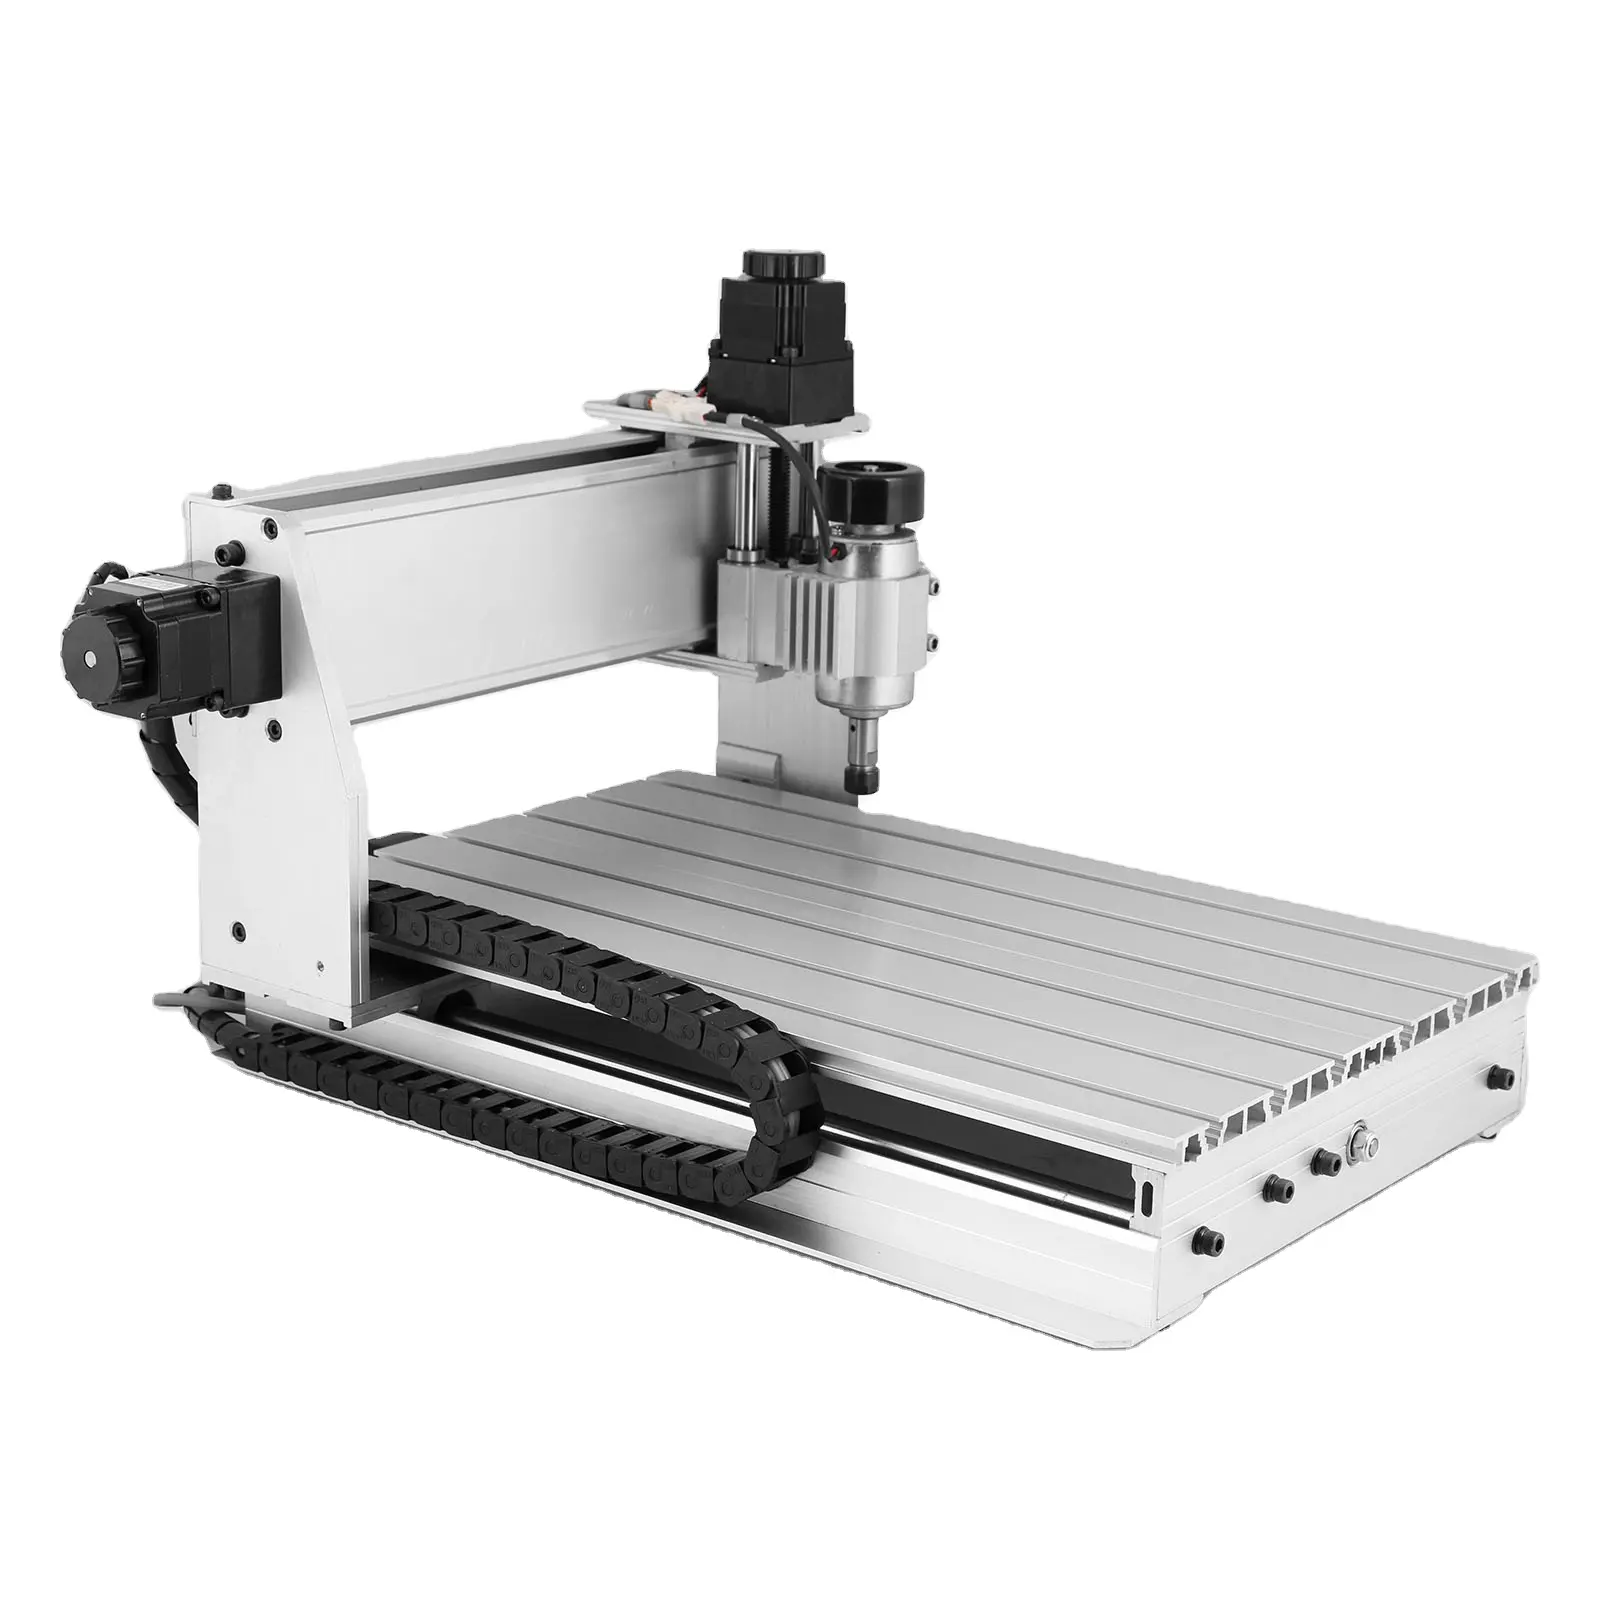 Good Price 3040T Wood Engraving Mini Cnc 4 Axis Cnc Machine with 400w dc motor